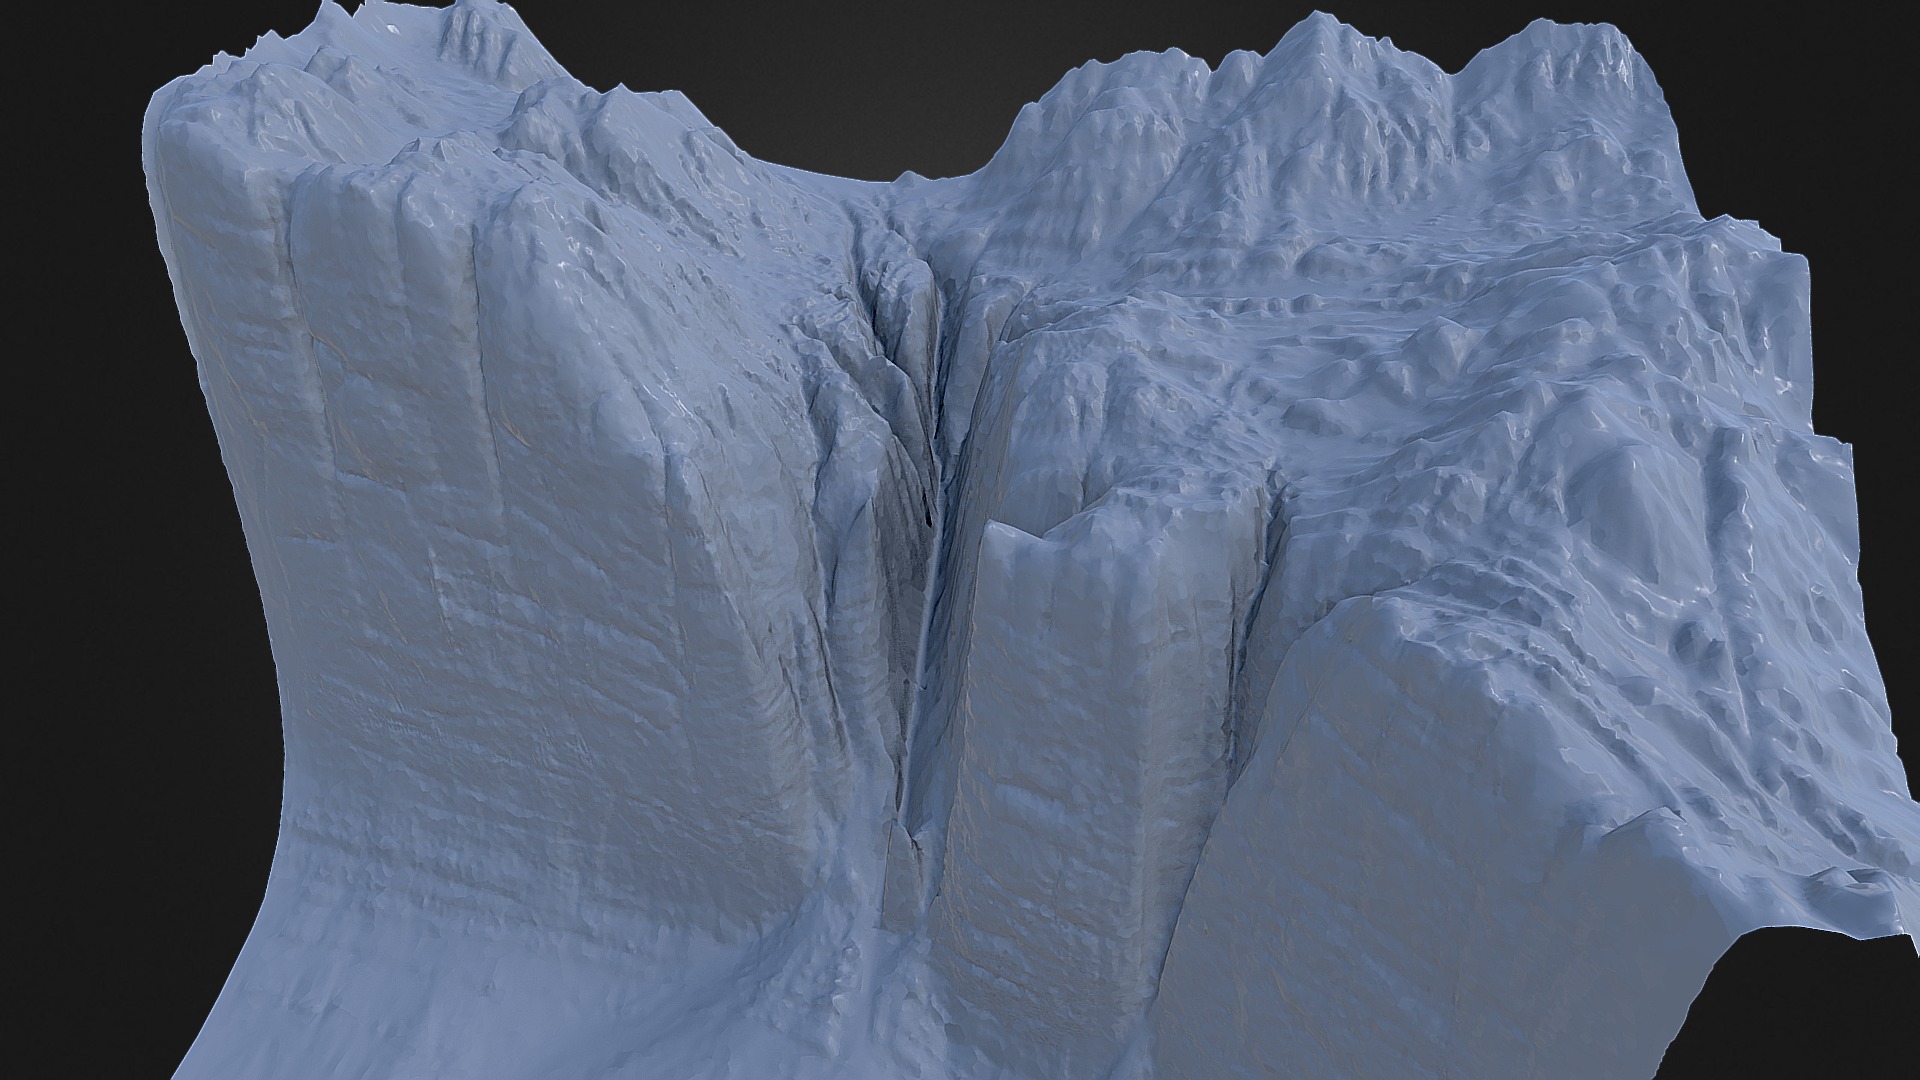 3D model eroded rock formation - This is a 3D model of the eroded rock formation. The 3D model is about a white rock with a dark background.